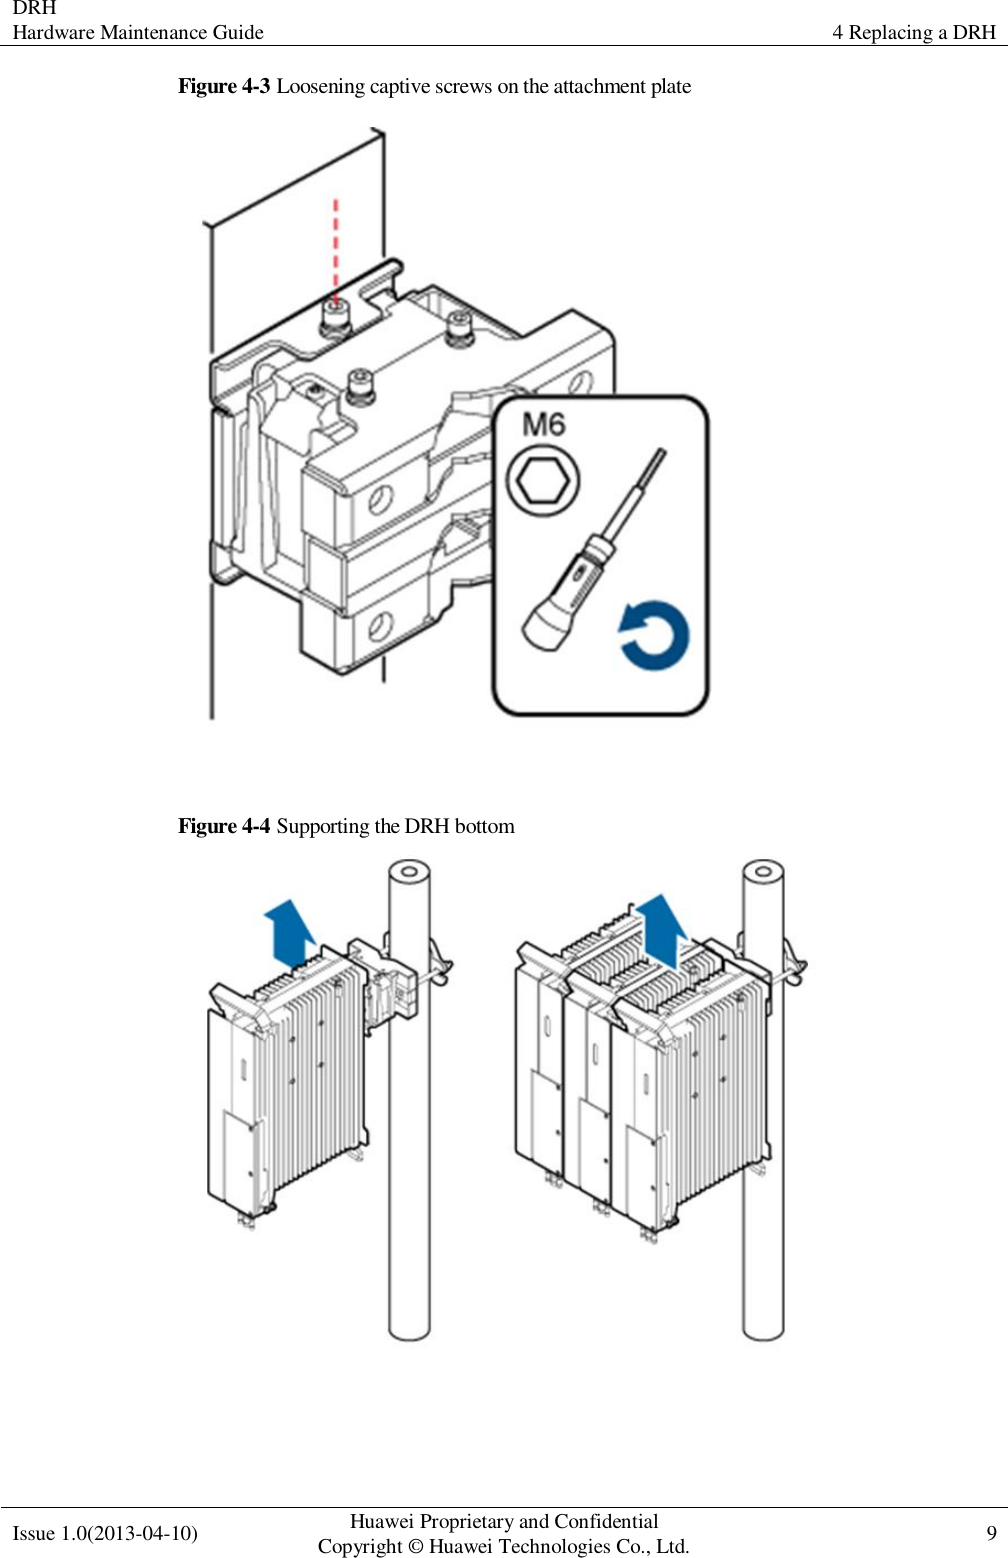 DRH Hardware Maintenance Guide 4 Replacing a DRH  Issue 1.0(2013-04-10) Huawei Proprietary and Confidential                                     Copyright © Huawei Technologies Co., Ltd. 9    Figure 4-3 Loosening captive screws on the attachment plate   Figure 4-4 Supporting the DRH bottom     